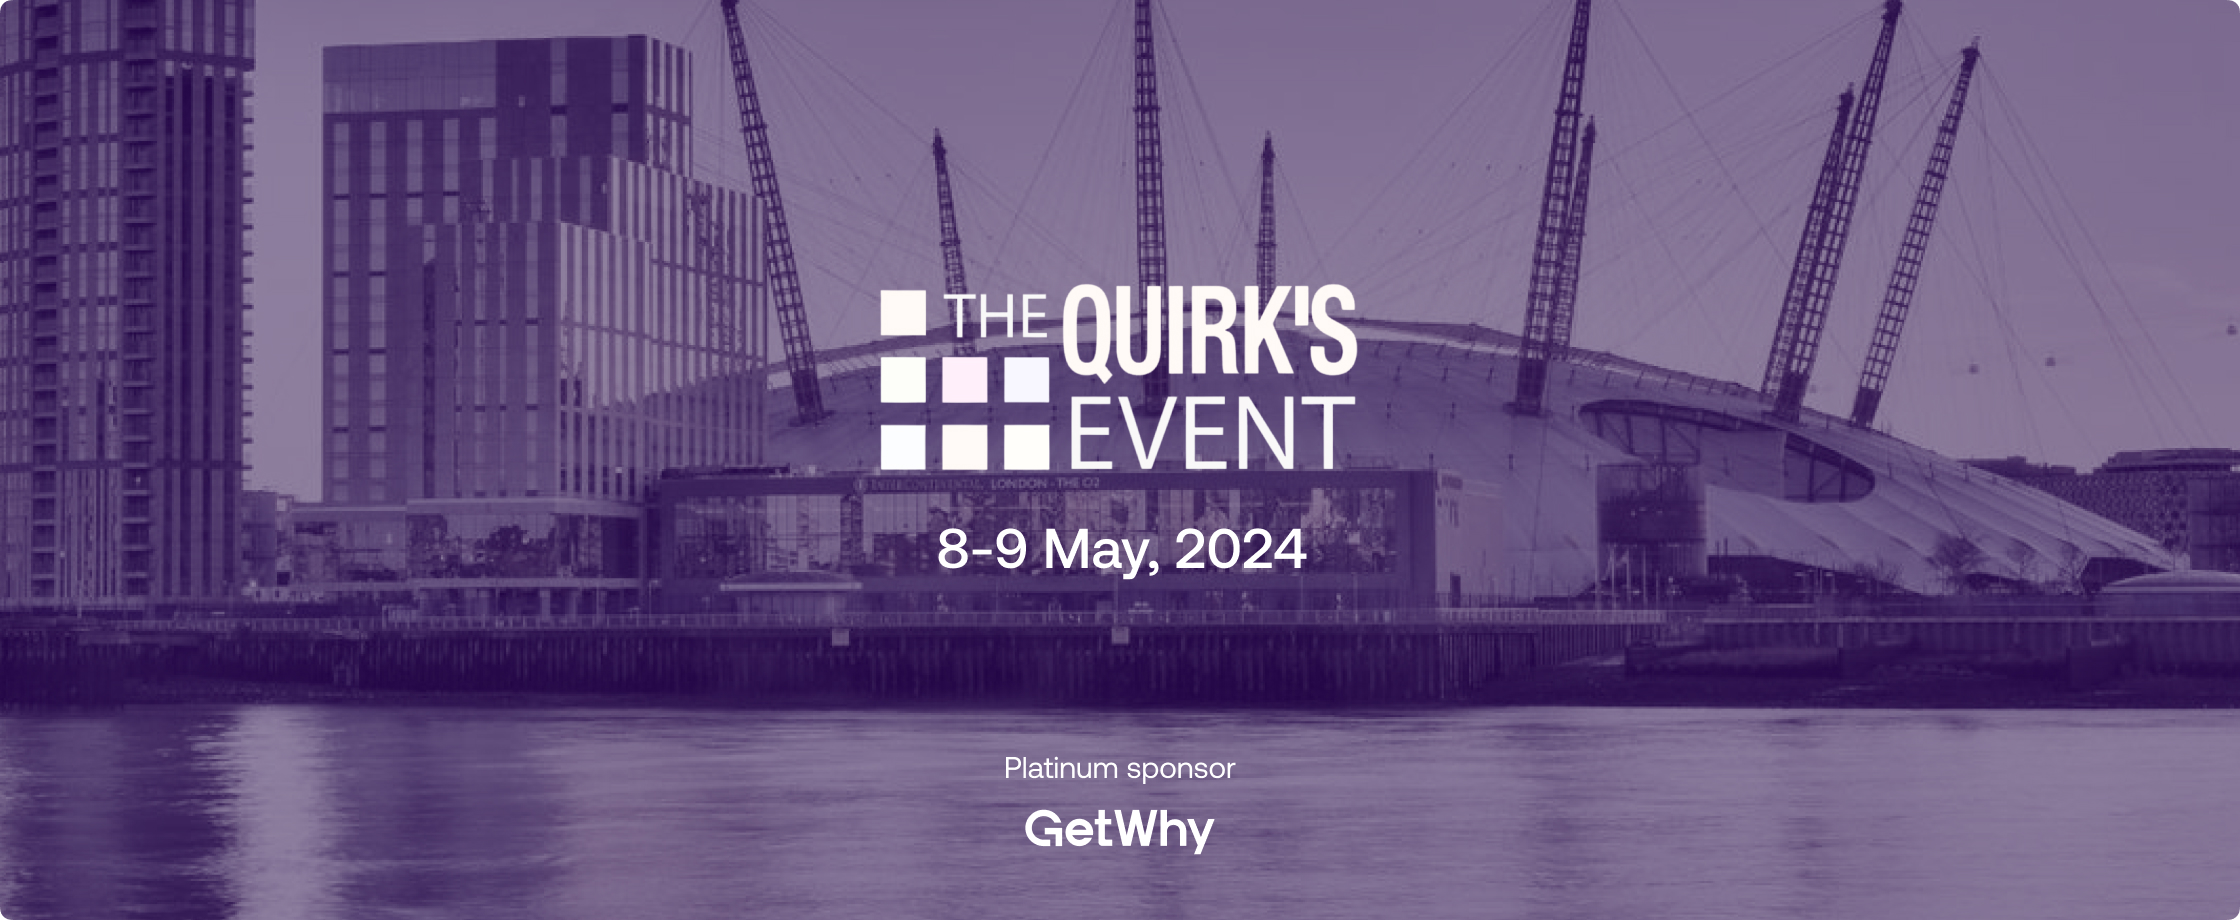 Quirks London - GetWhy